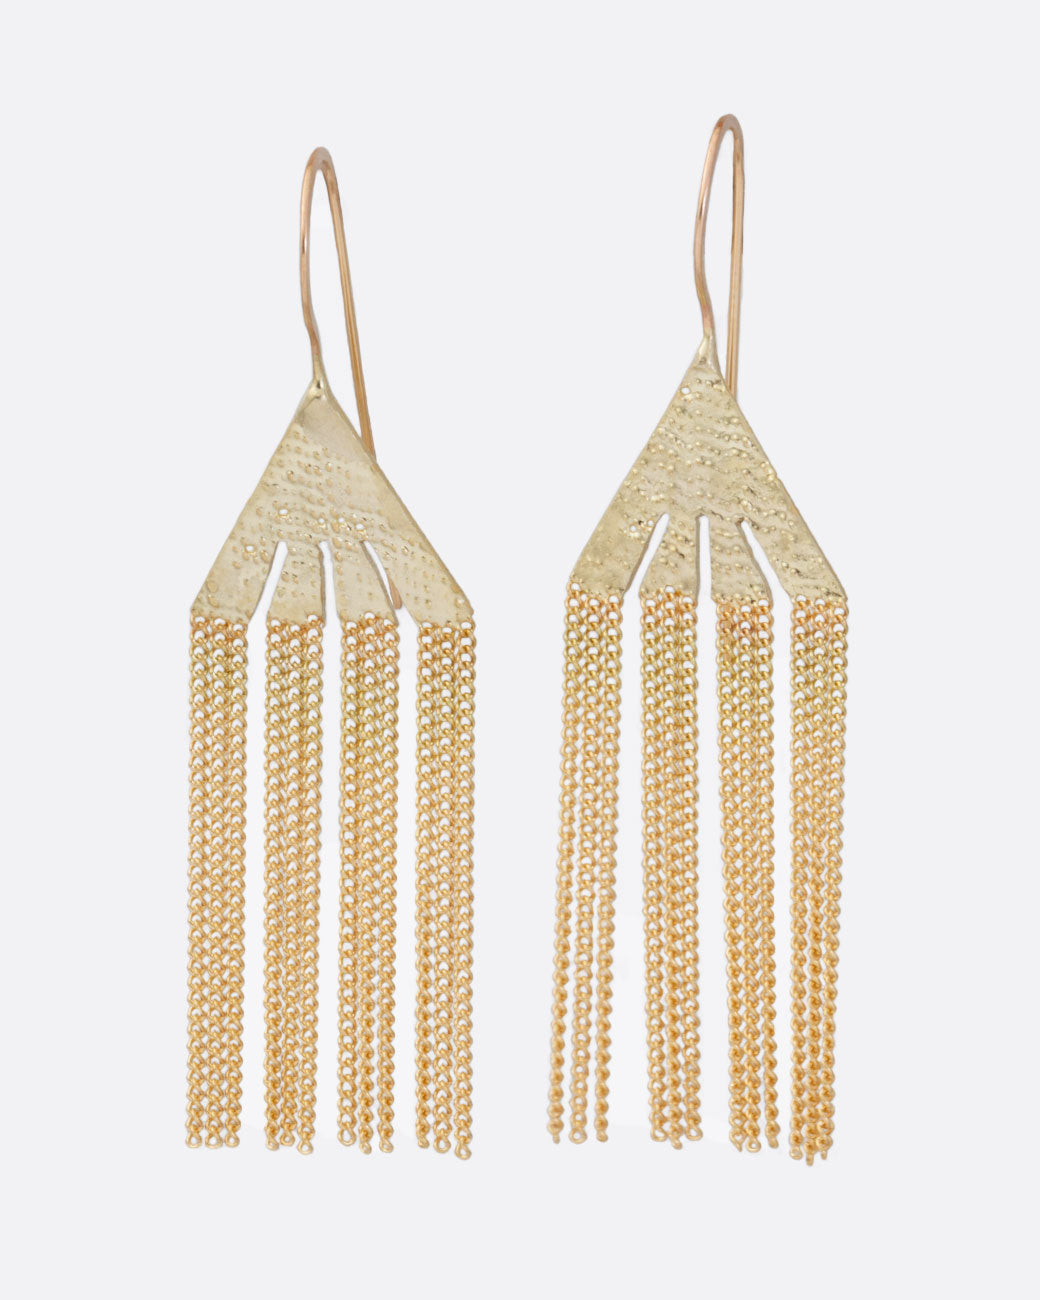 18k yellow gold icicle chain earrings by Hannah Keefe, shown from the front.